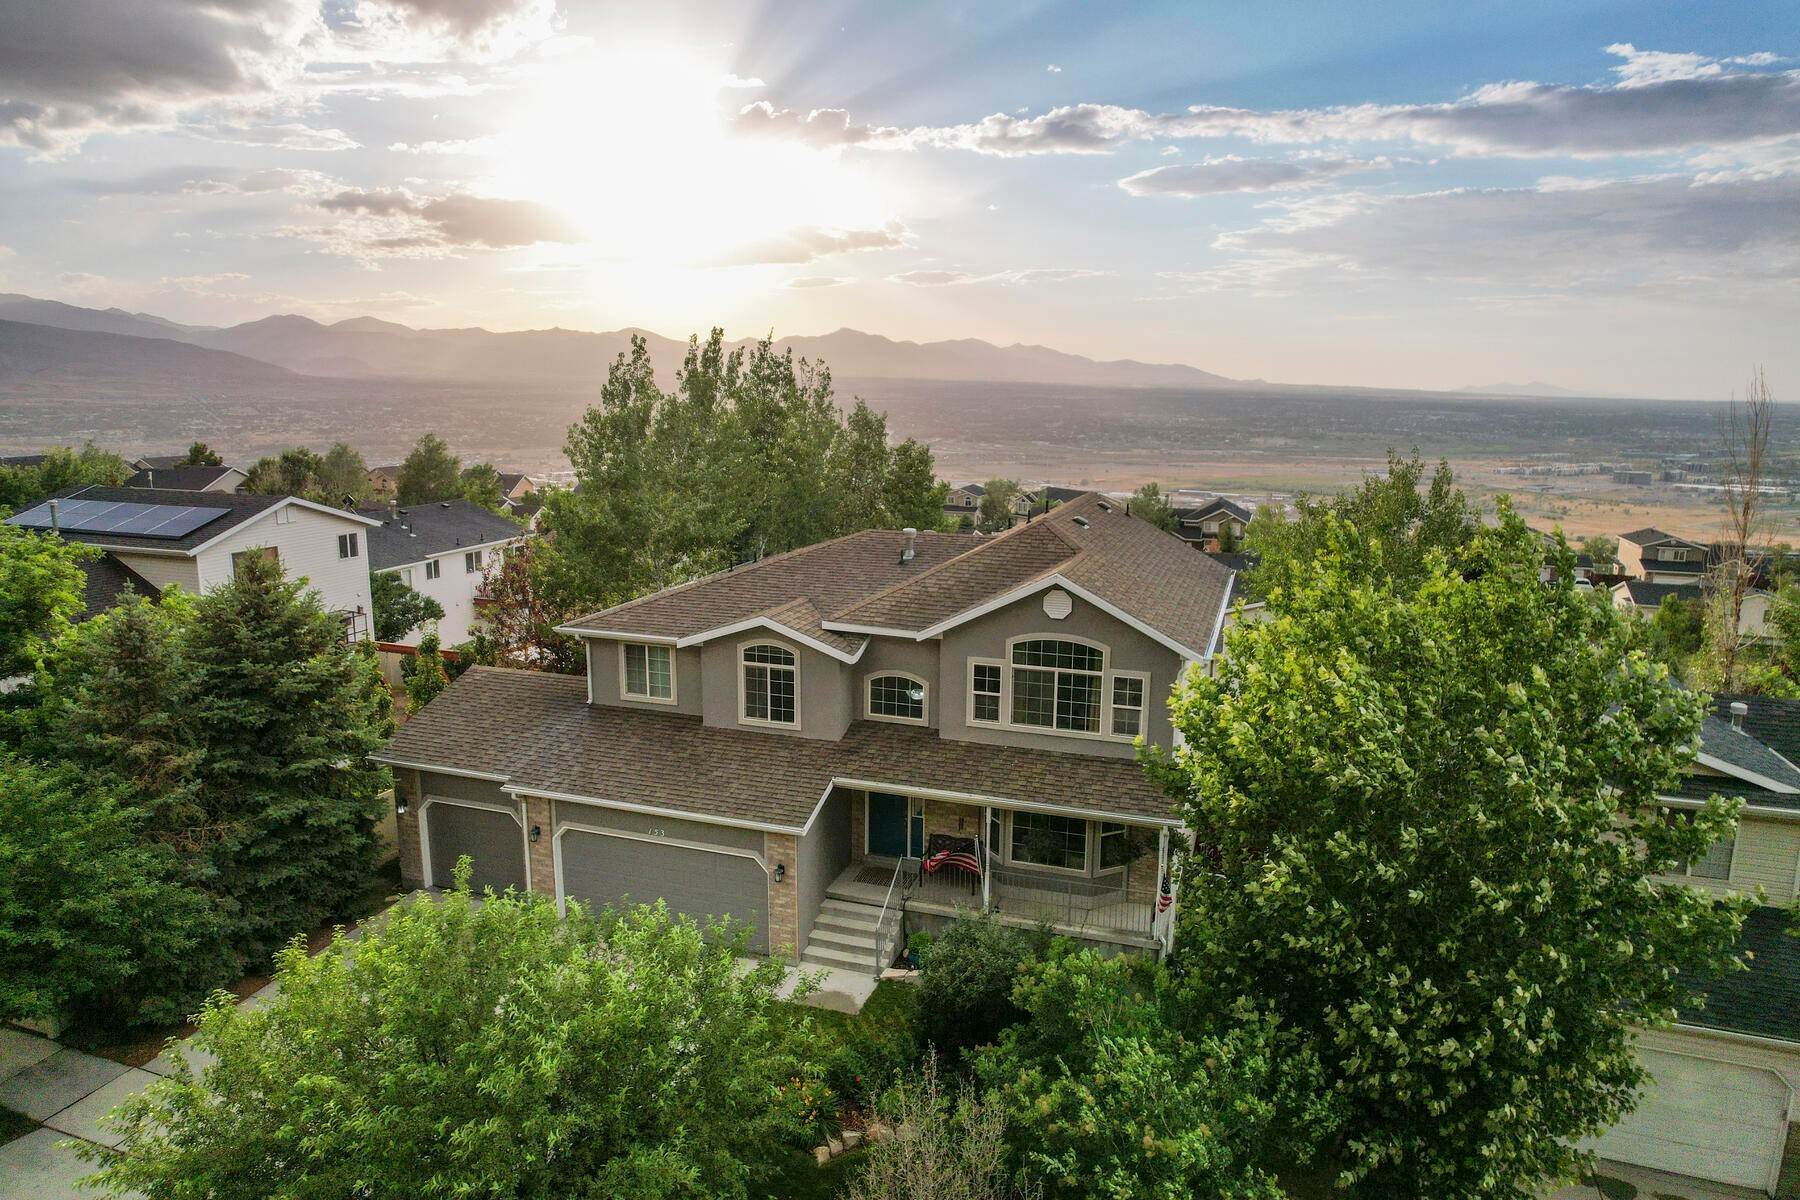 Property for Sale at Updated Home in the Heart of Silicon Slopes 153 E Manilla Dr Draper, Utah 84020 United States